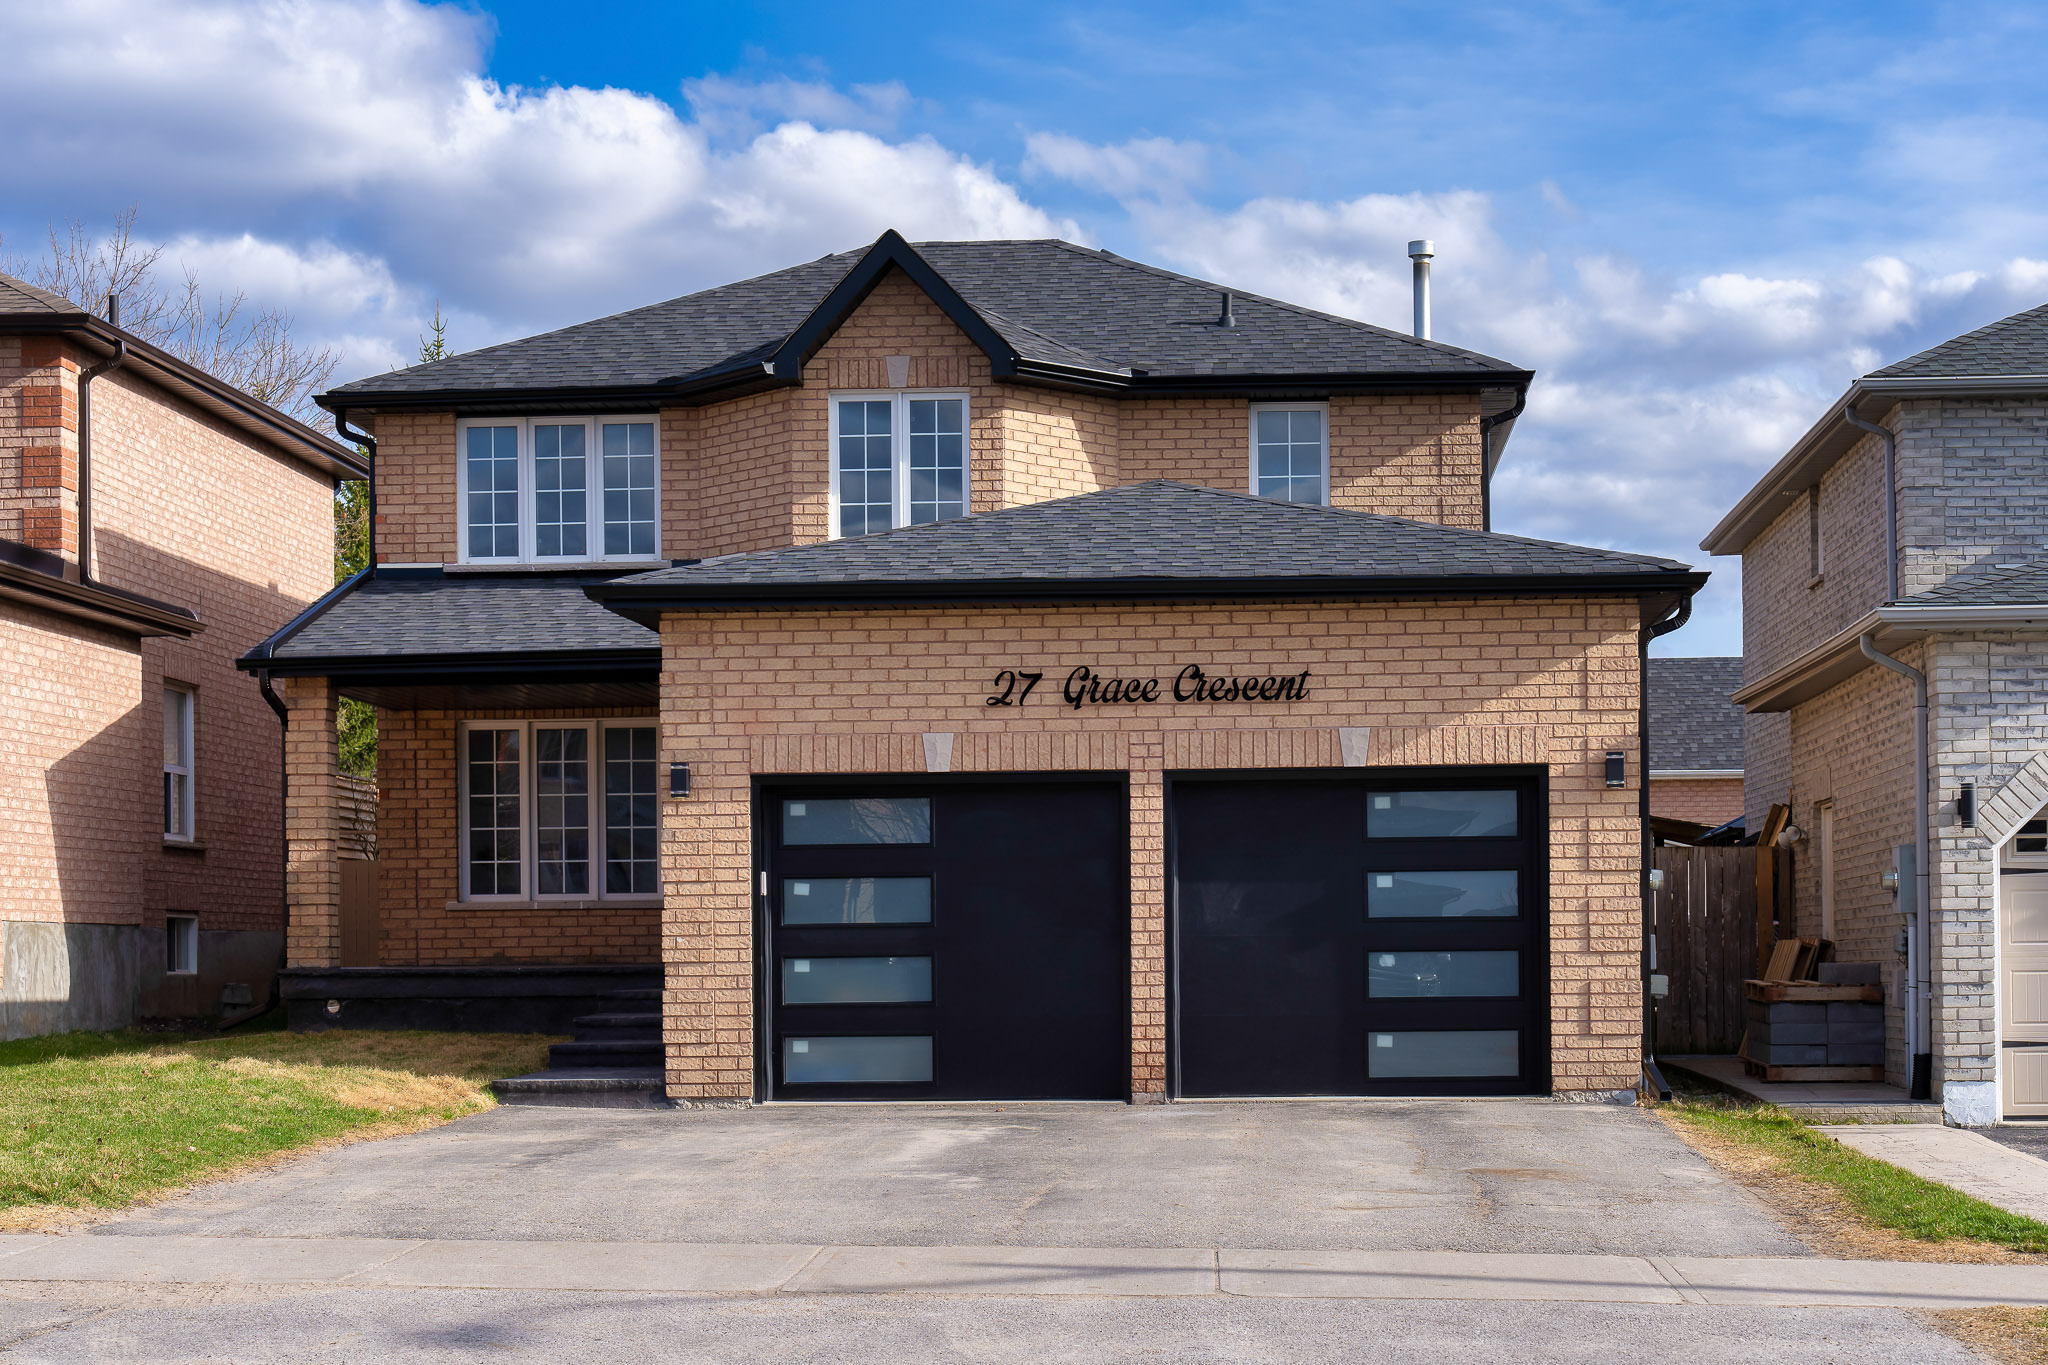 27 Grace Crescent, Barrie, ON L4N 9S8, Canada